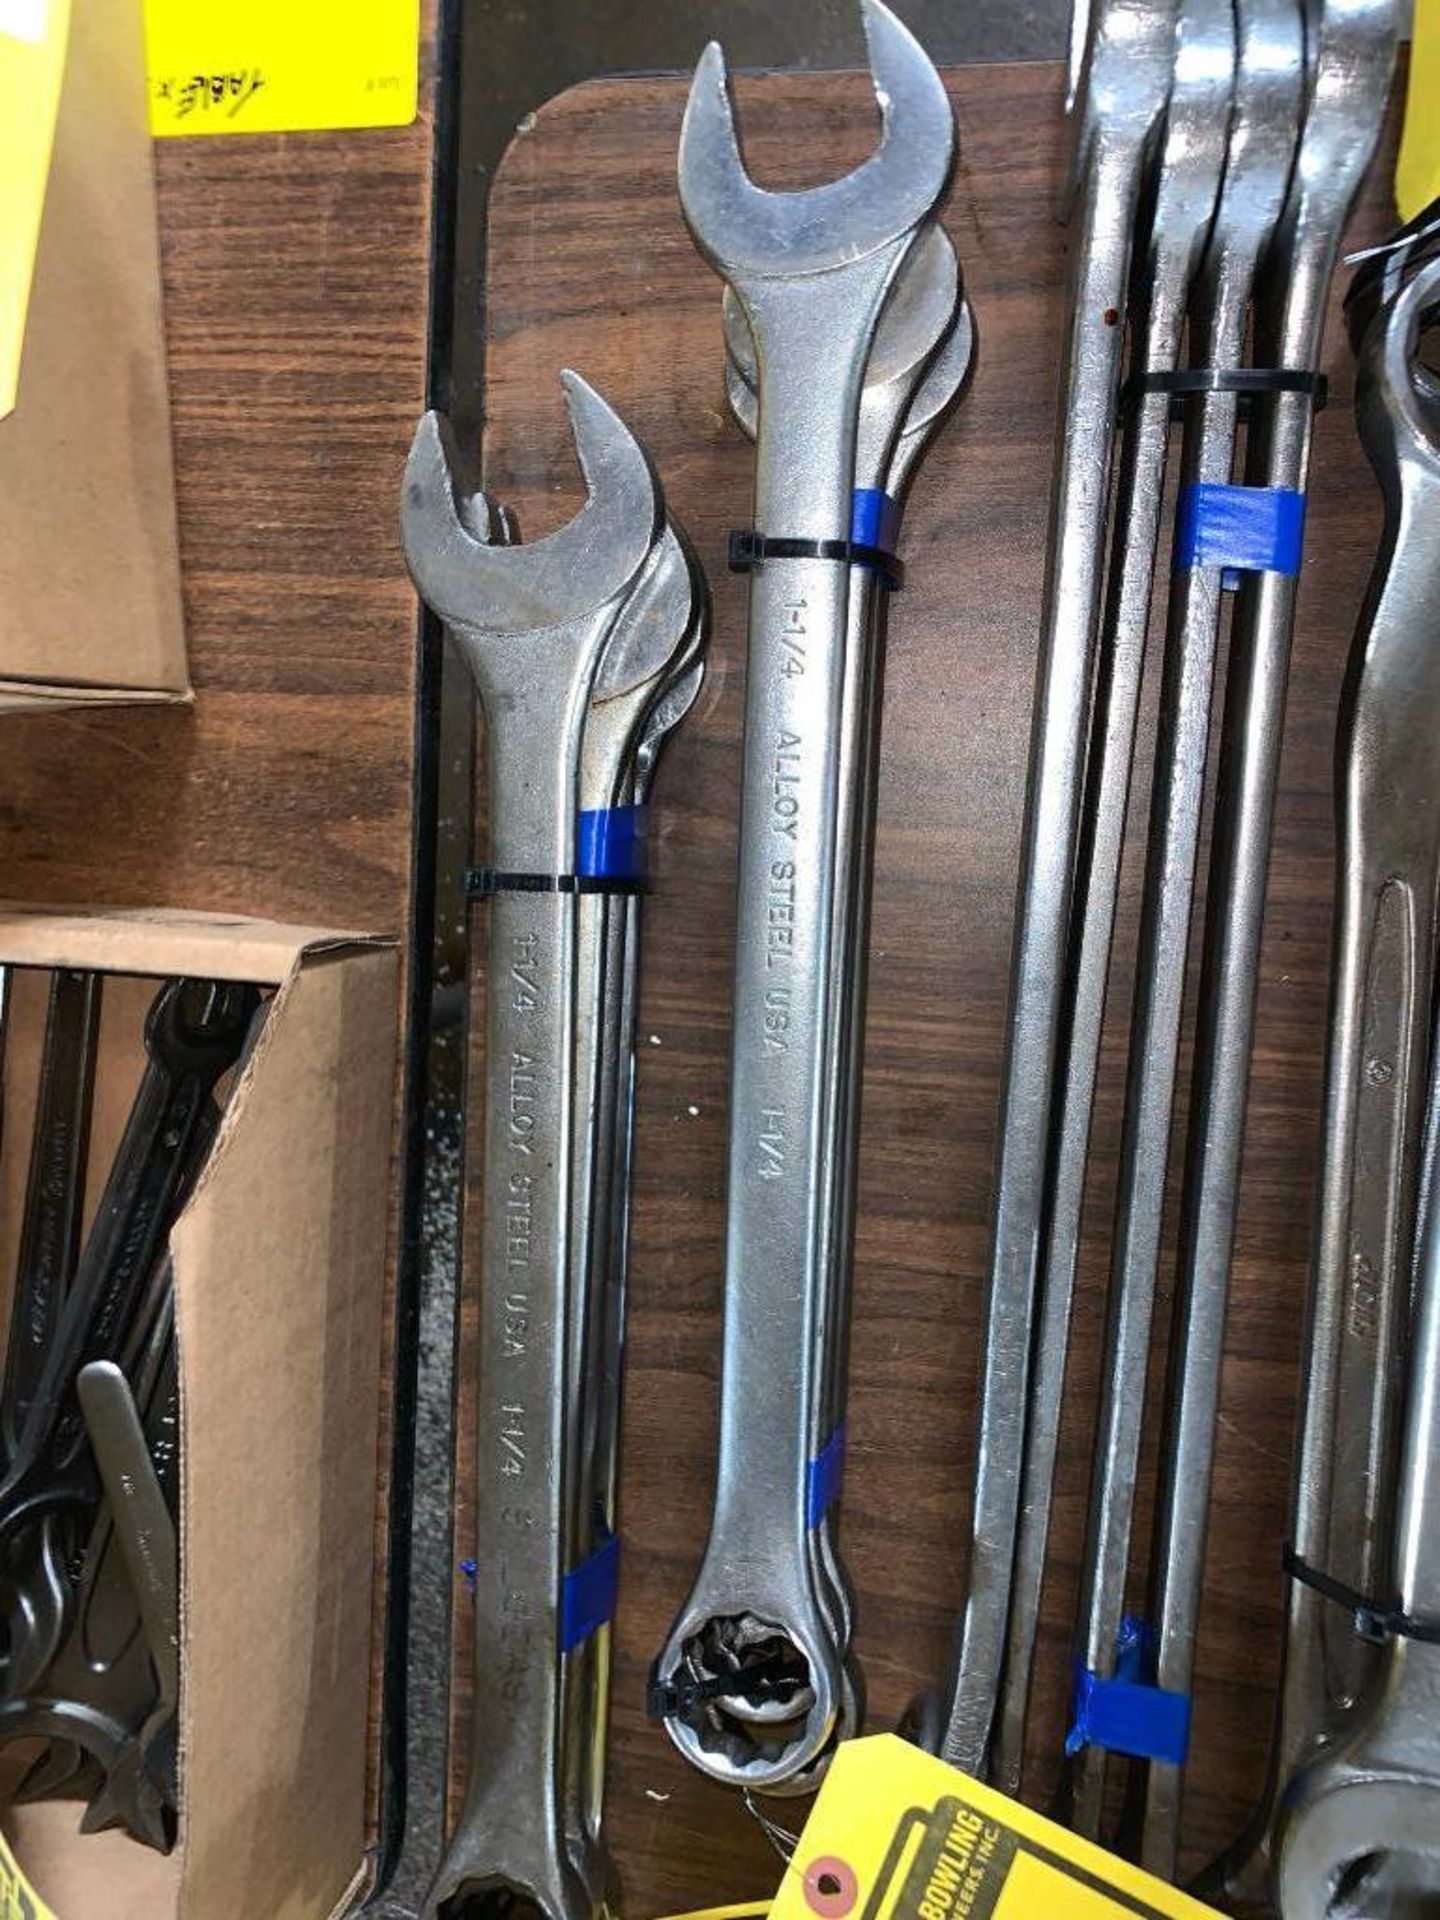 (4) ASSORTED END WRENCHES